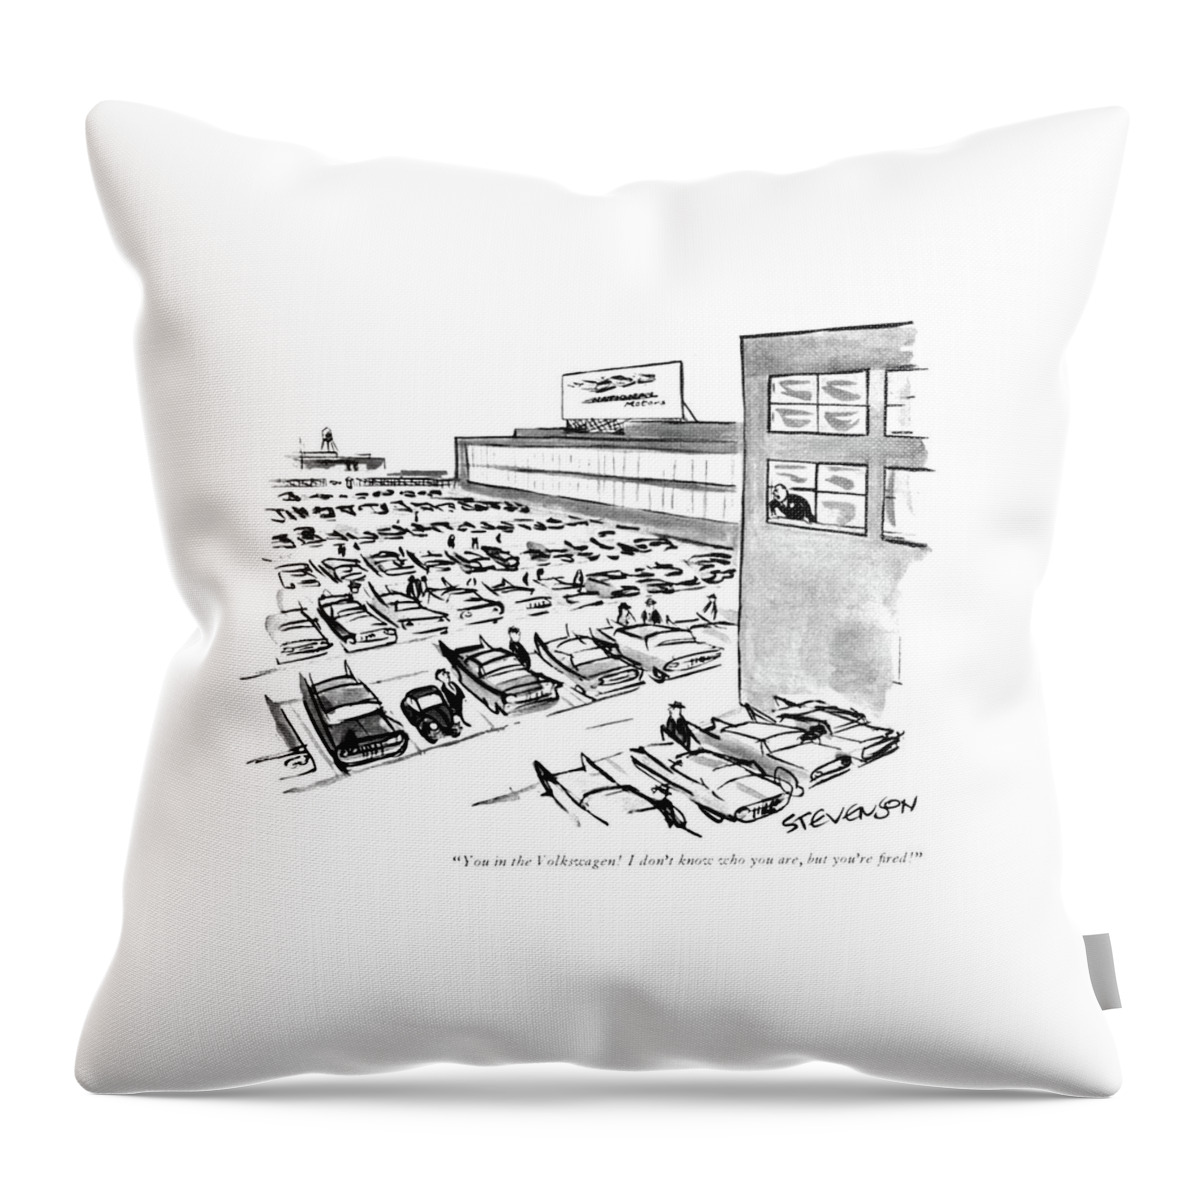 You In The Volkswagen! I Don't Know Who Throw Pillow